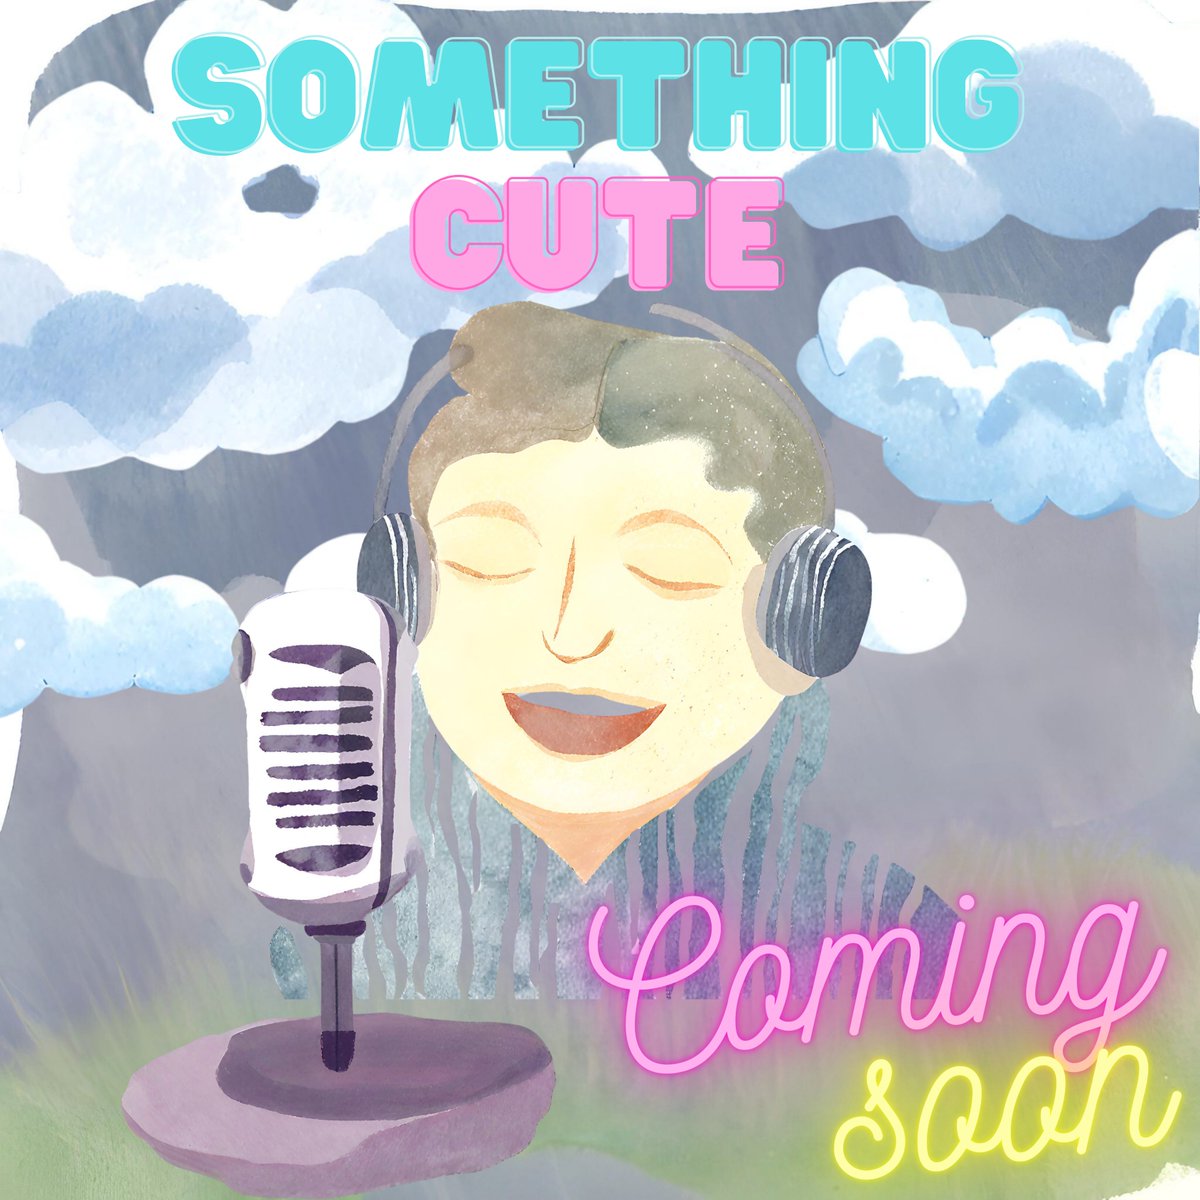 Whispers of joy 😊 and tales of charm 🌈 are on the horizon. Are you ready to hear the sweetness? 🎧✨ Coming soon.

#AIFriend #ArtificialIntelligence #AICommunity #VirtualCompanion #SmartTechnology #DigitalMind #FutureTech #MachineLearning #AIInnovation #TechSavvy